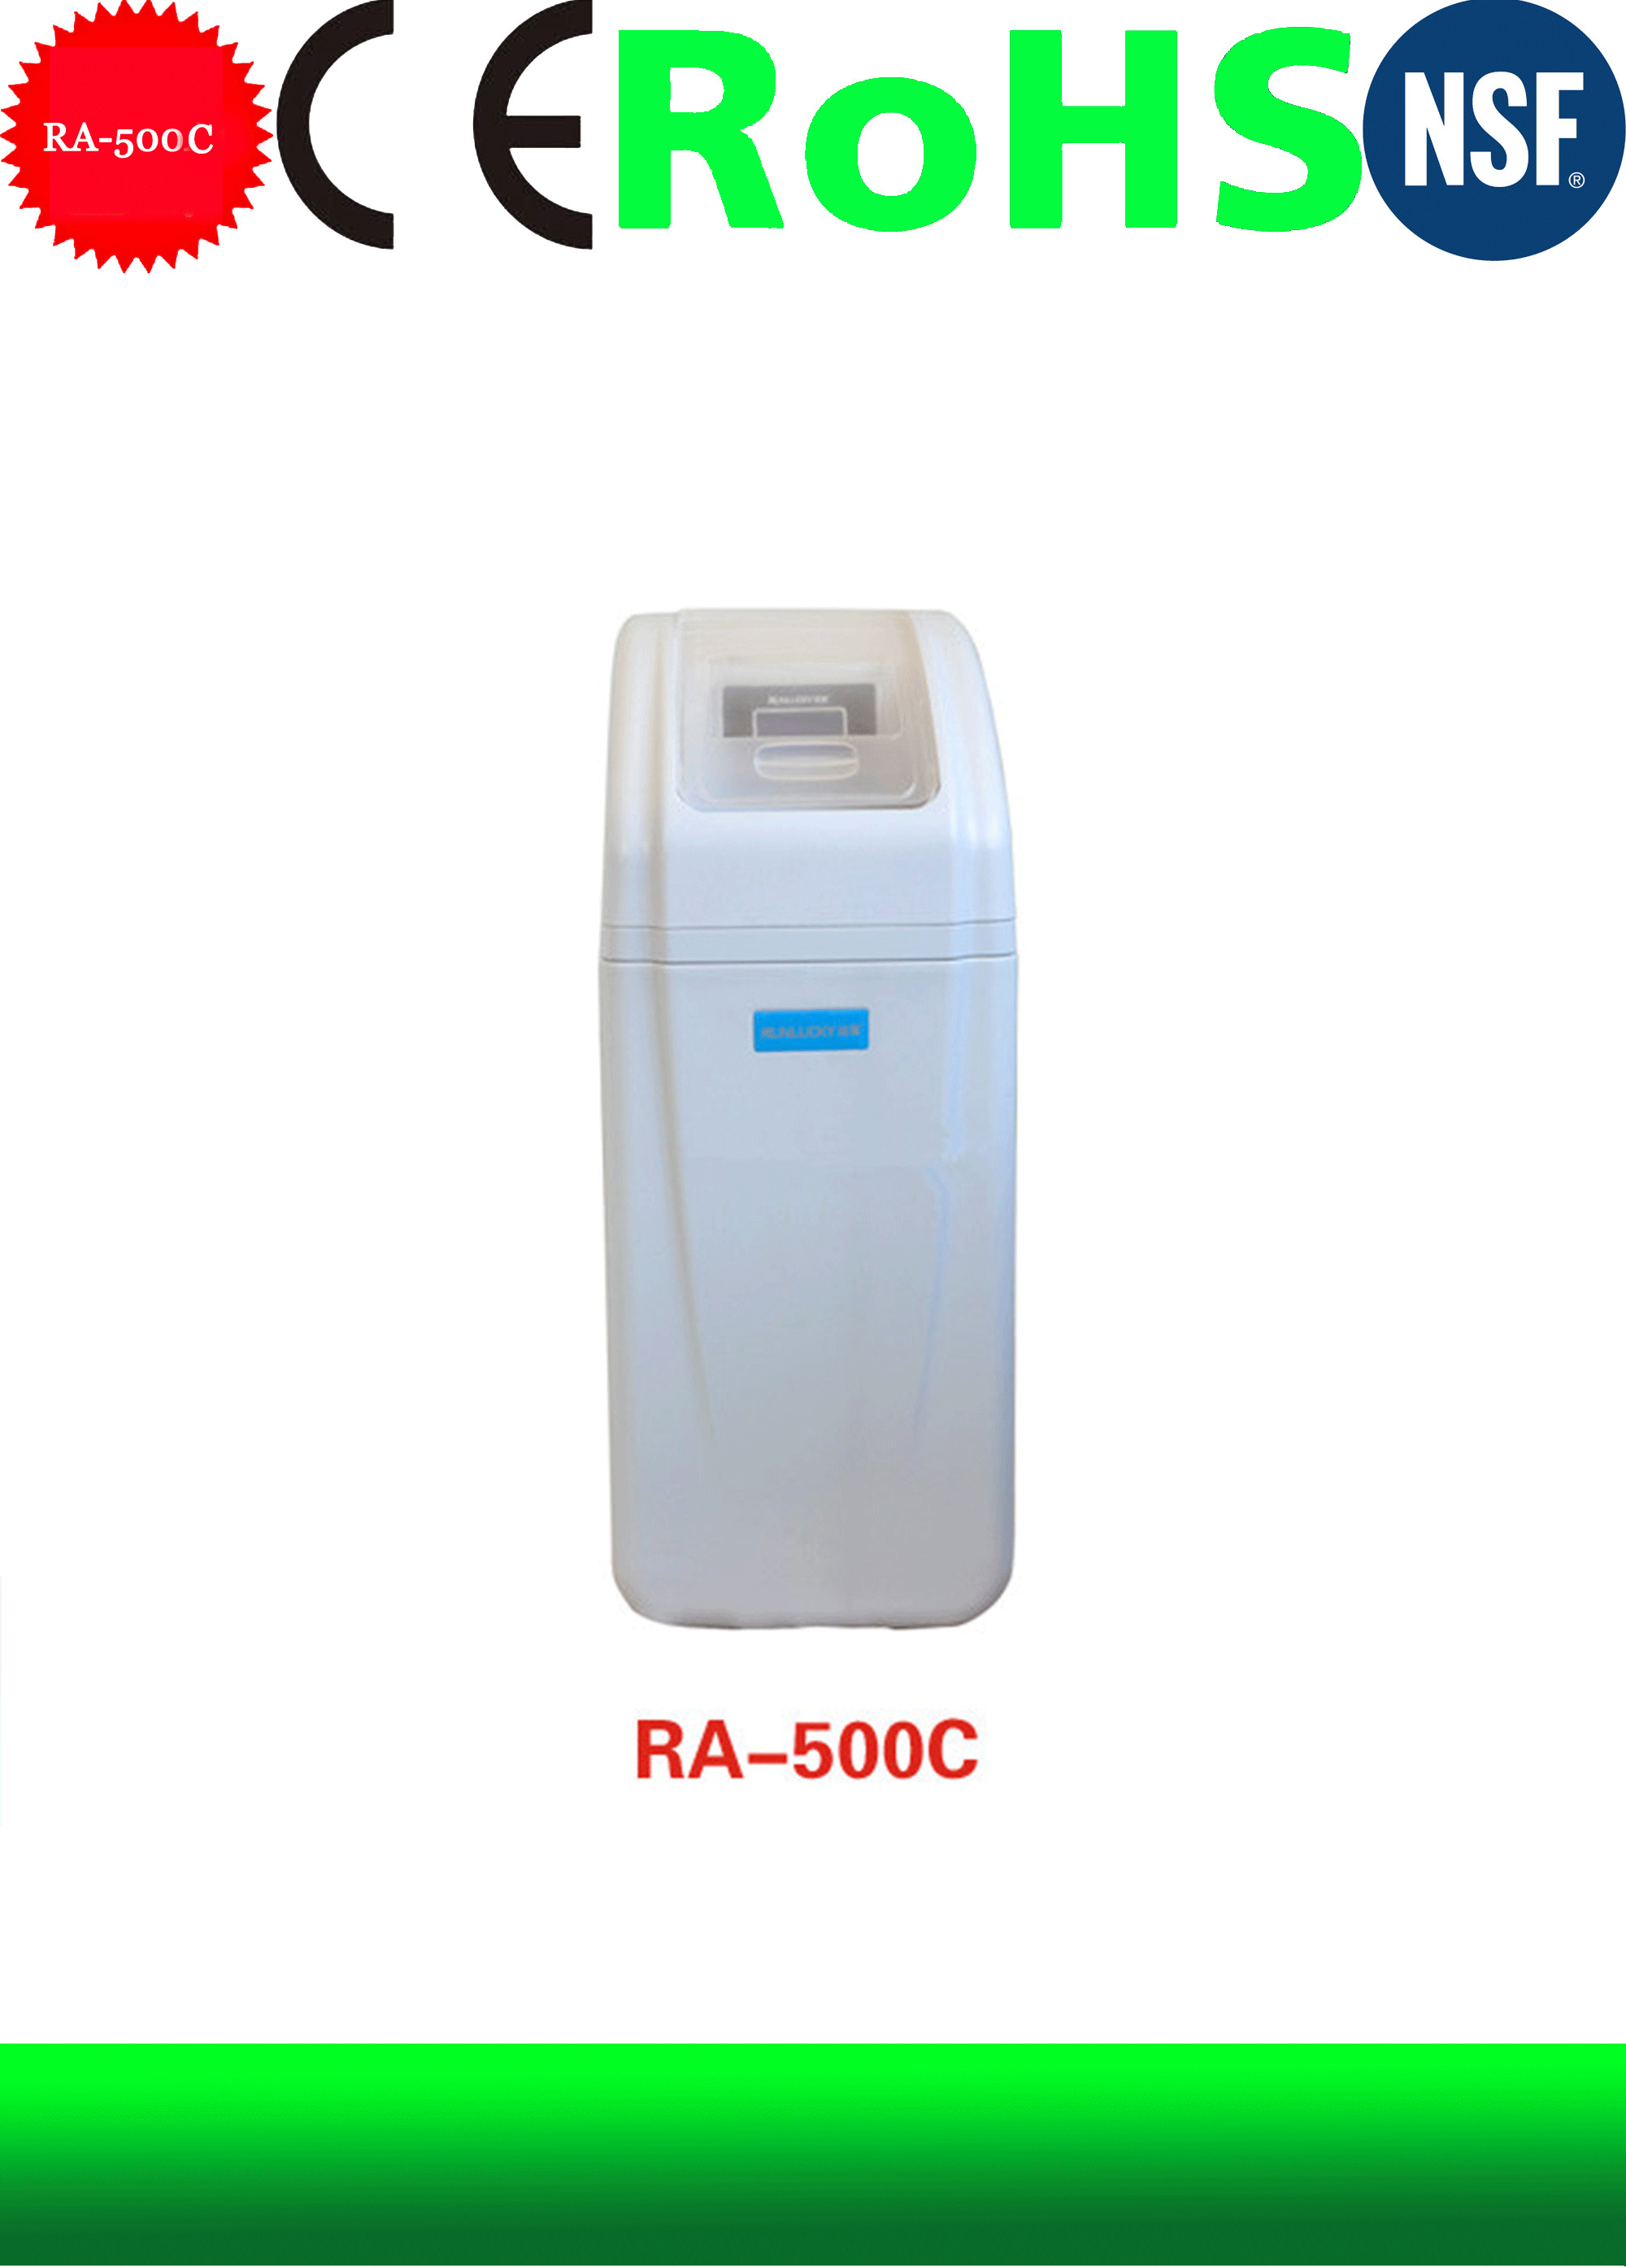  Runlucky Automatic Residential Water Softner RA-500C for Water Treatment Manufactures